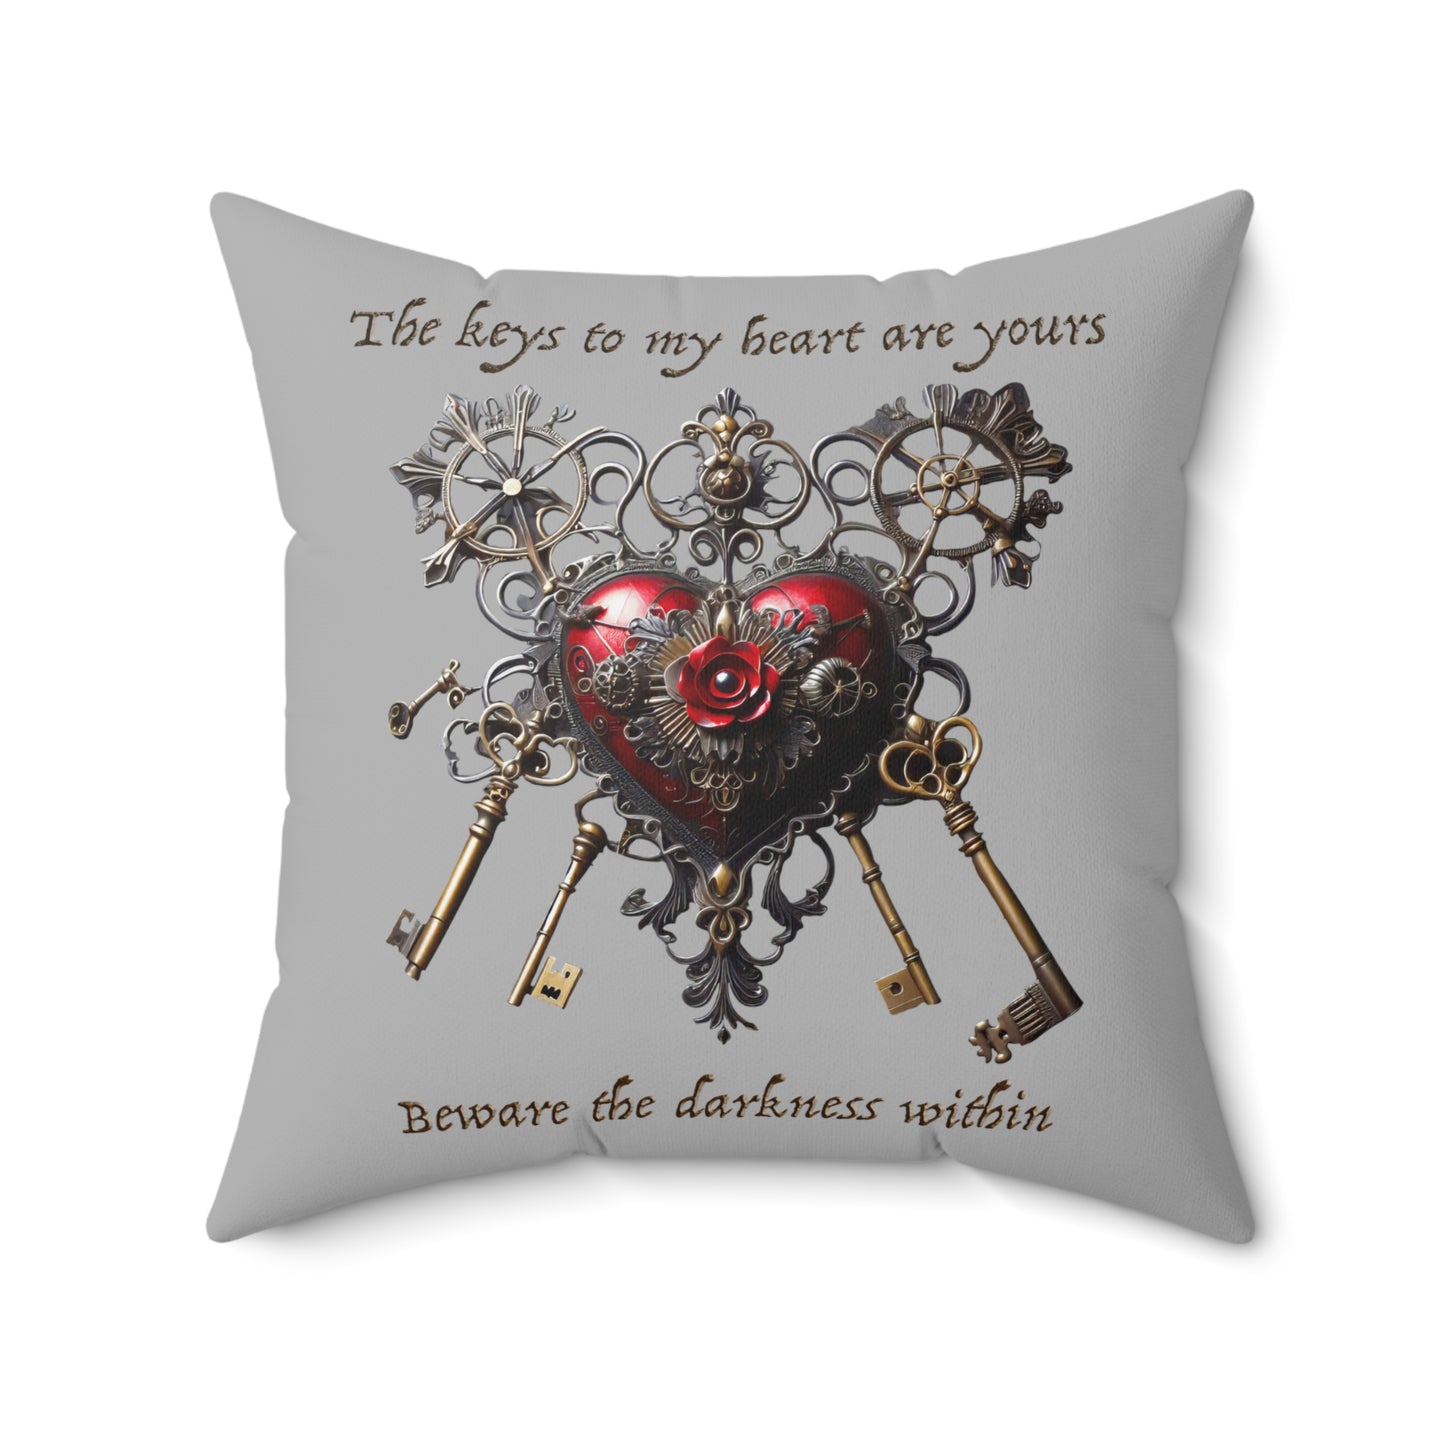 "Beware the Darkness Within" heart and keys edgy pillow